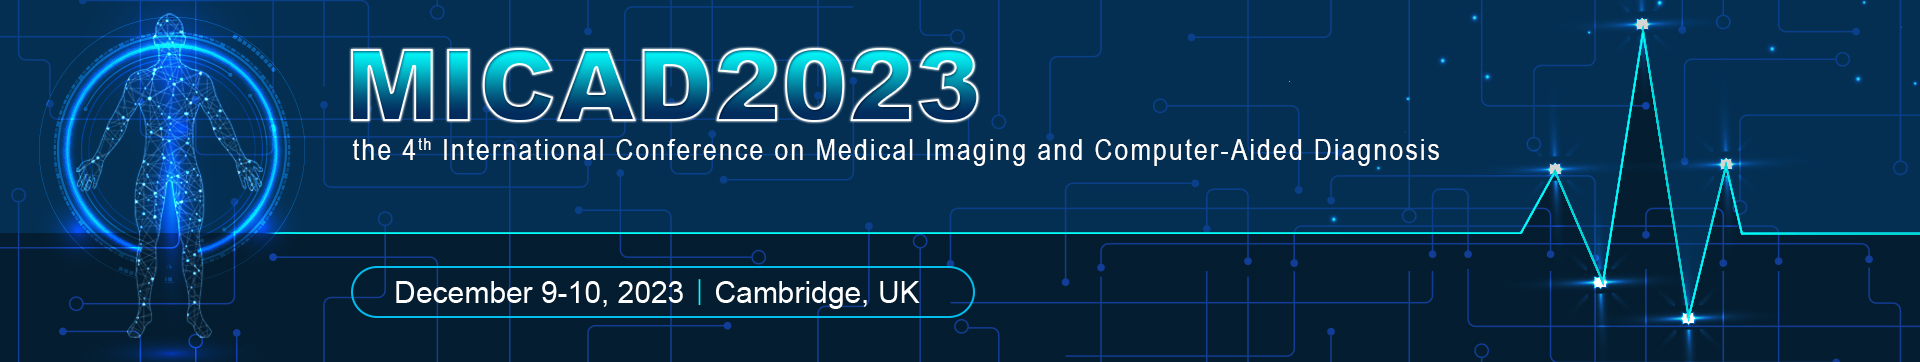 4th International Conference on Medical Imaging and Computer-Aided Diagnosis